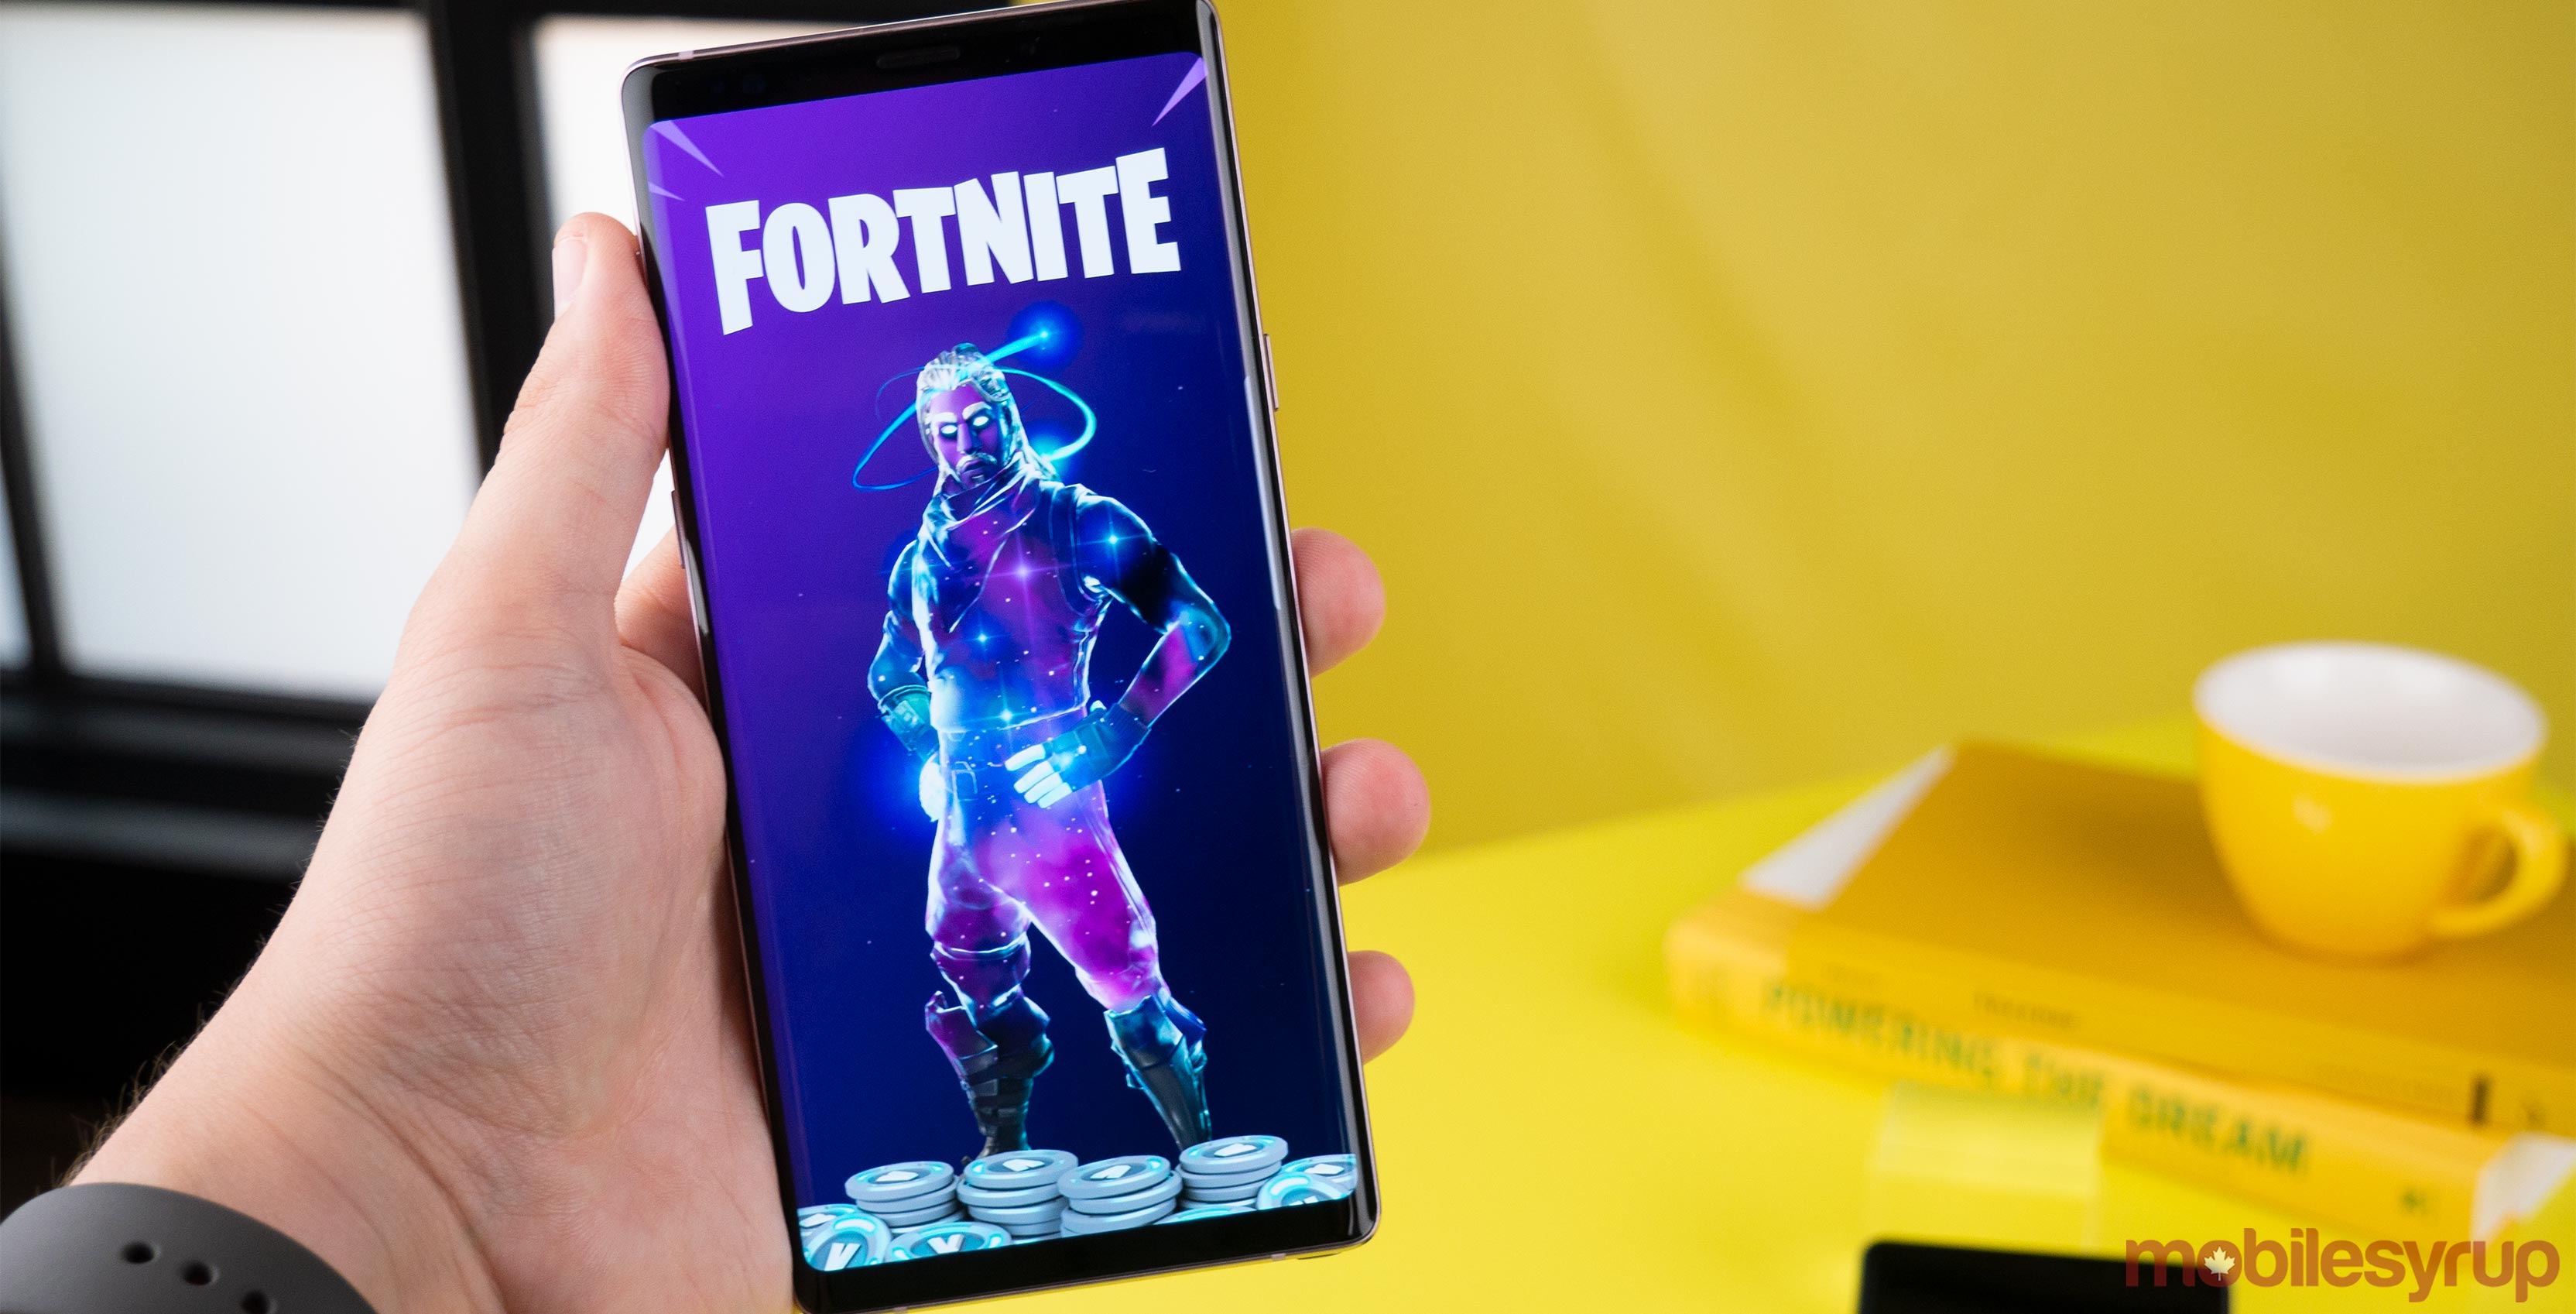 fortnite on android - fortnite samsung tab a 101